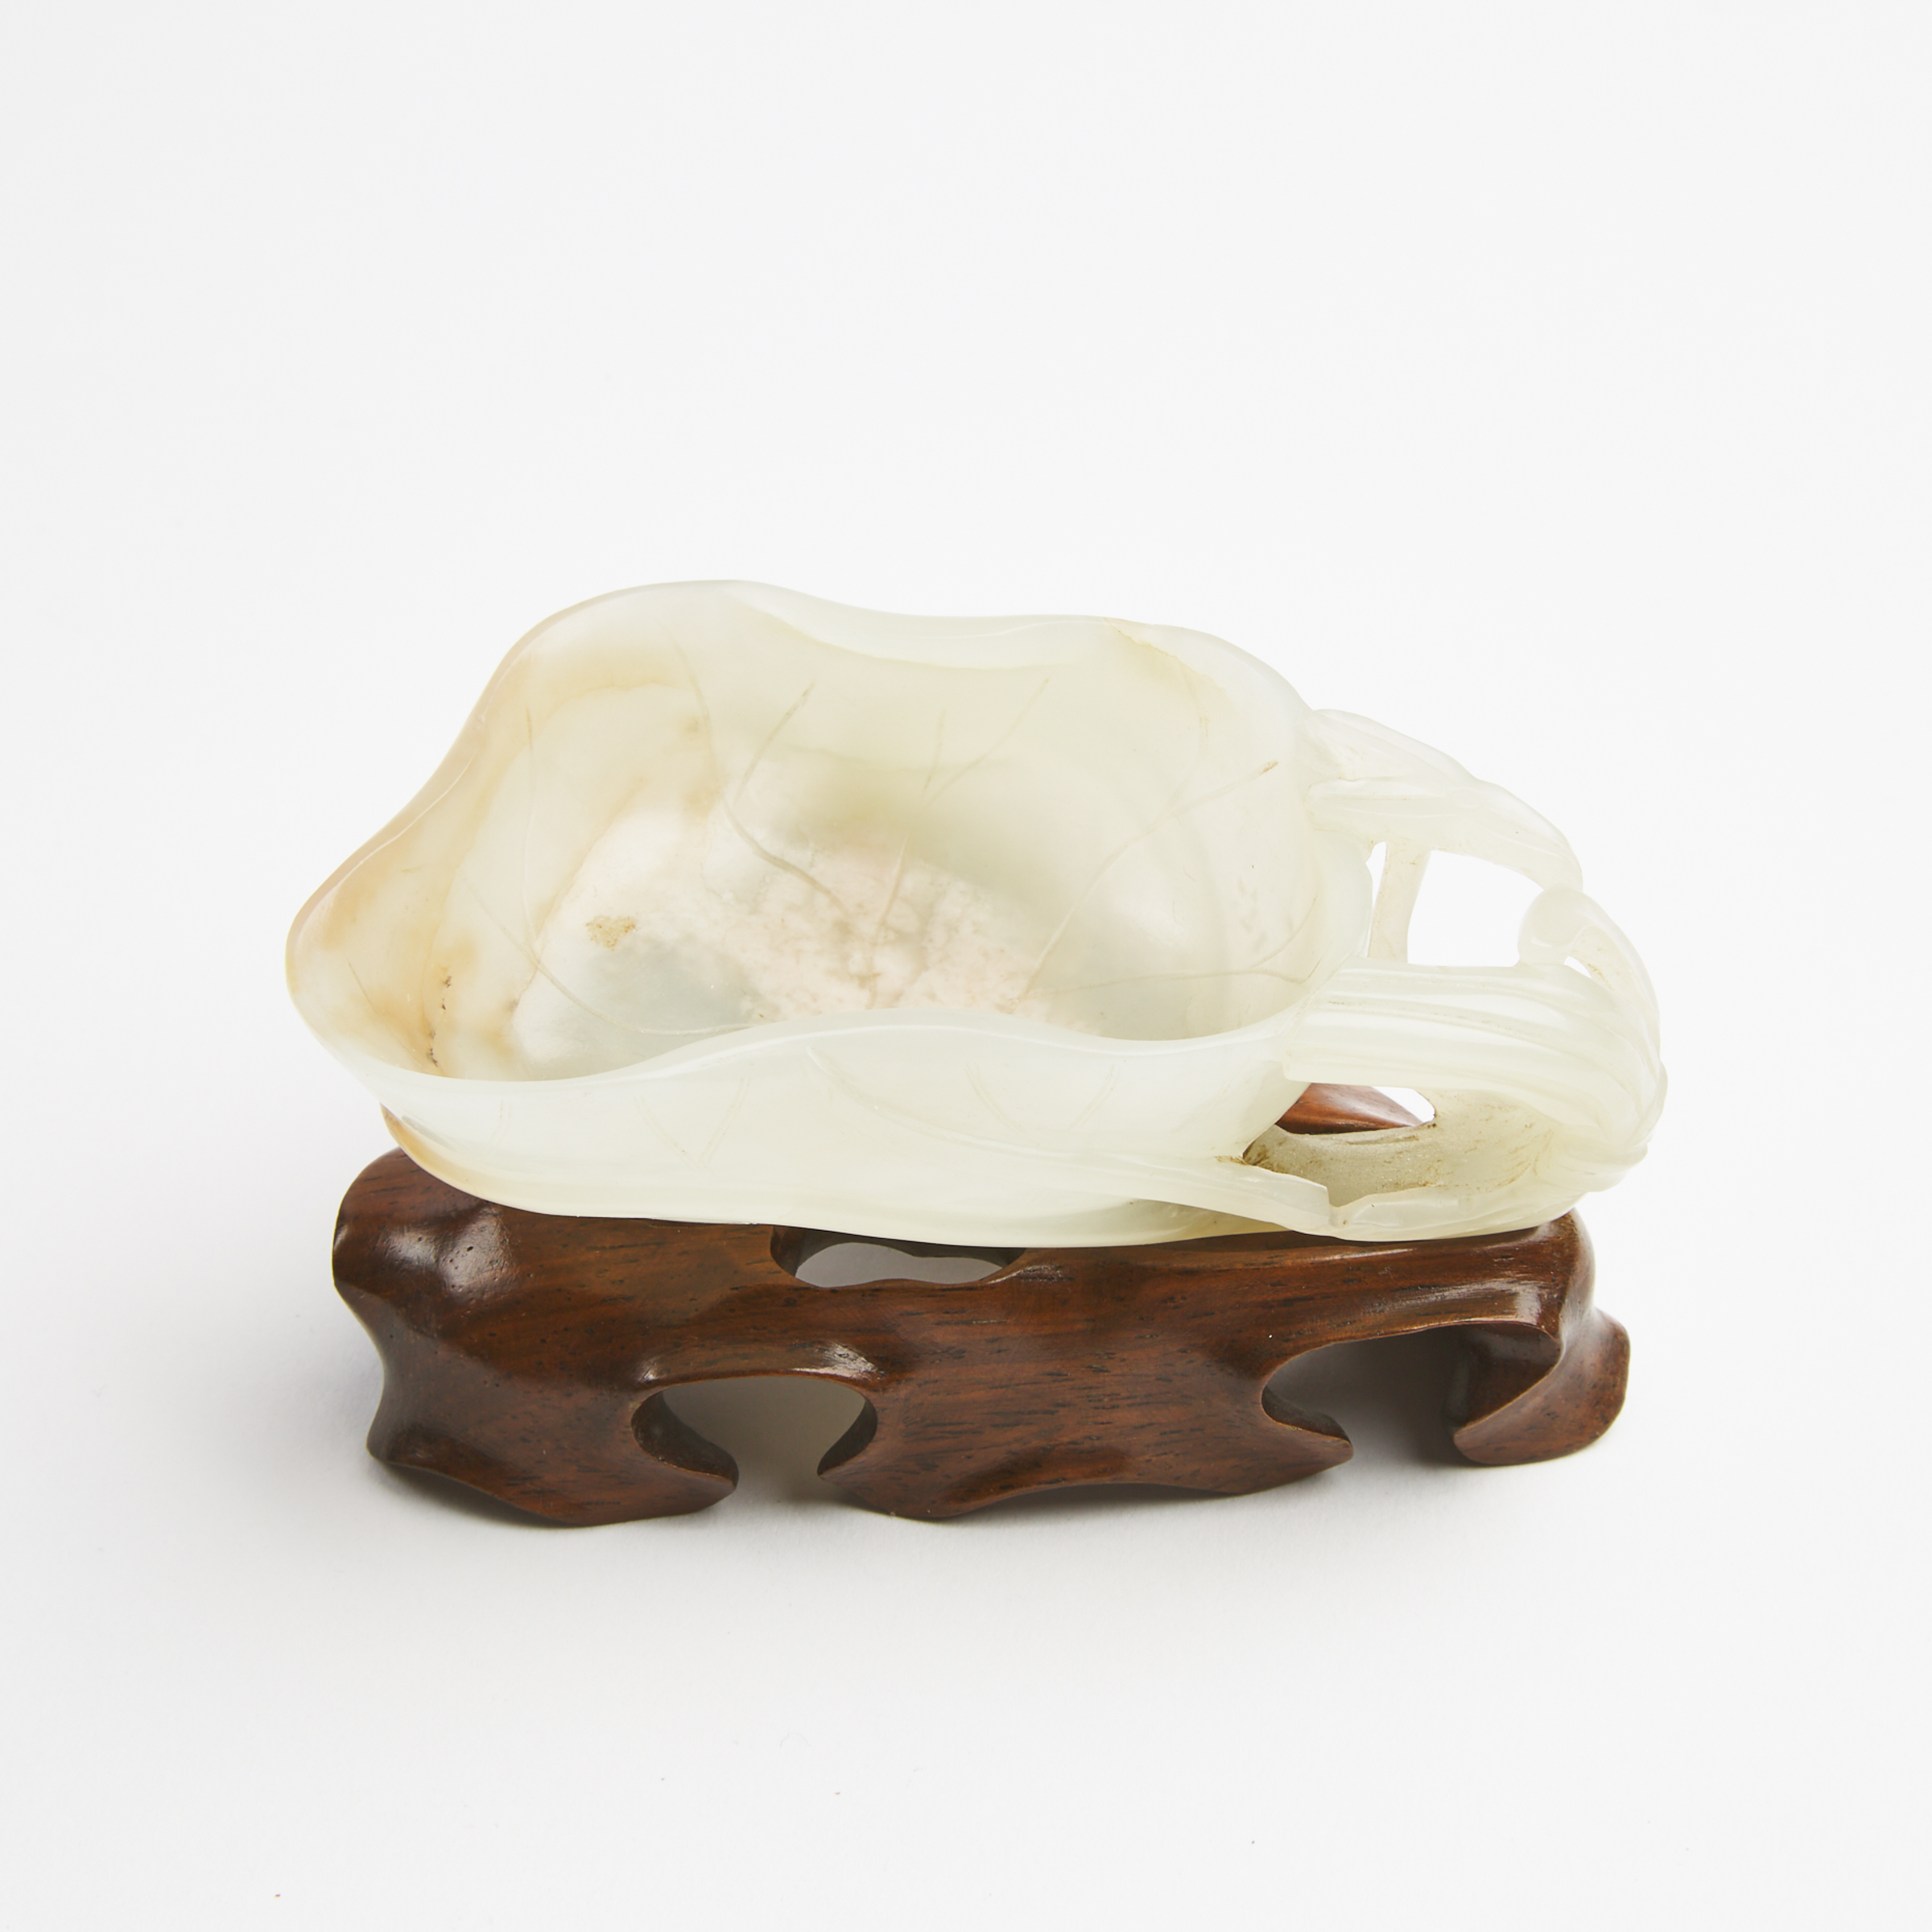 A White Jade Carved 'Lotus' Libation Cup, Ming Dynasty (1368-1644)